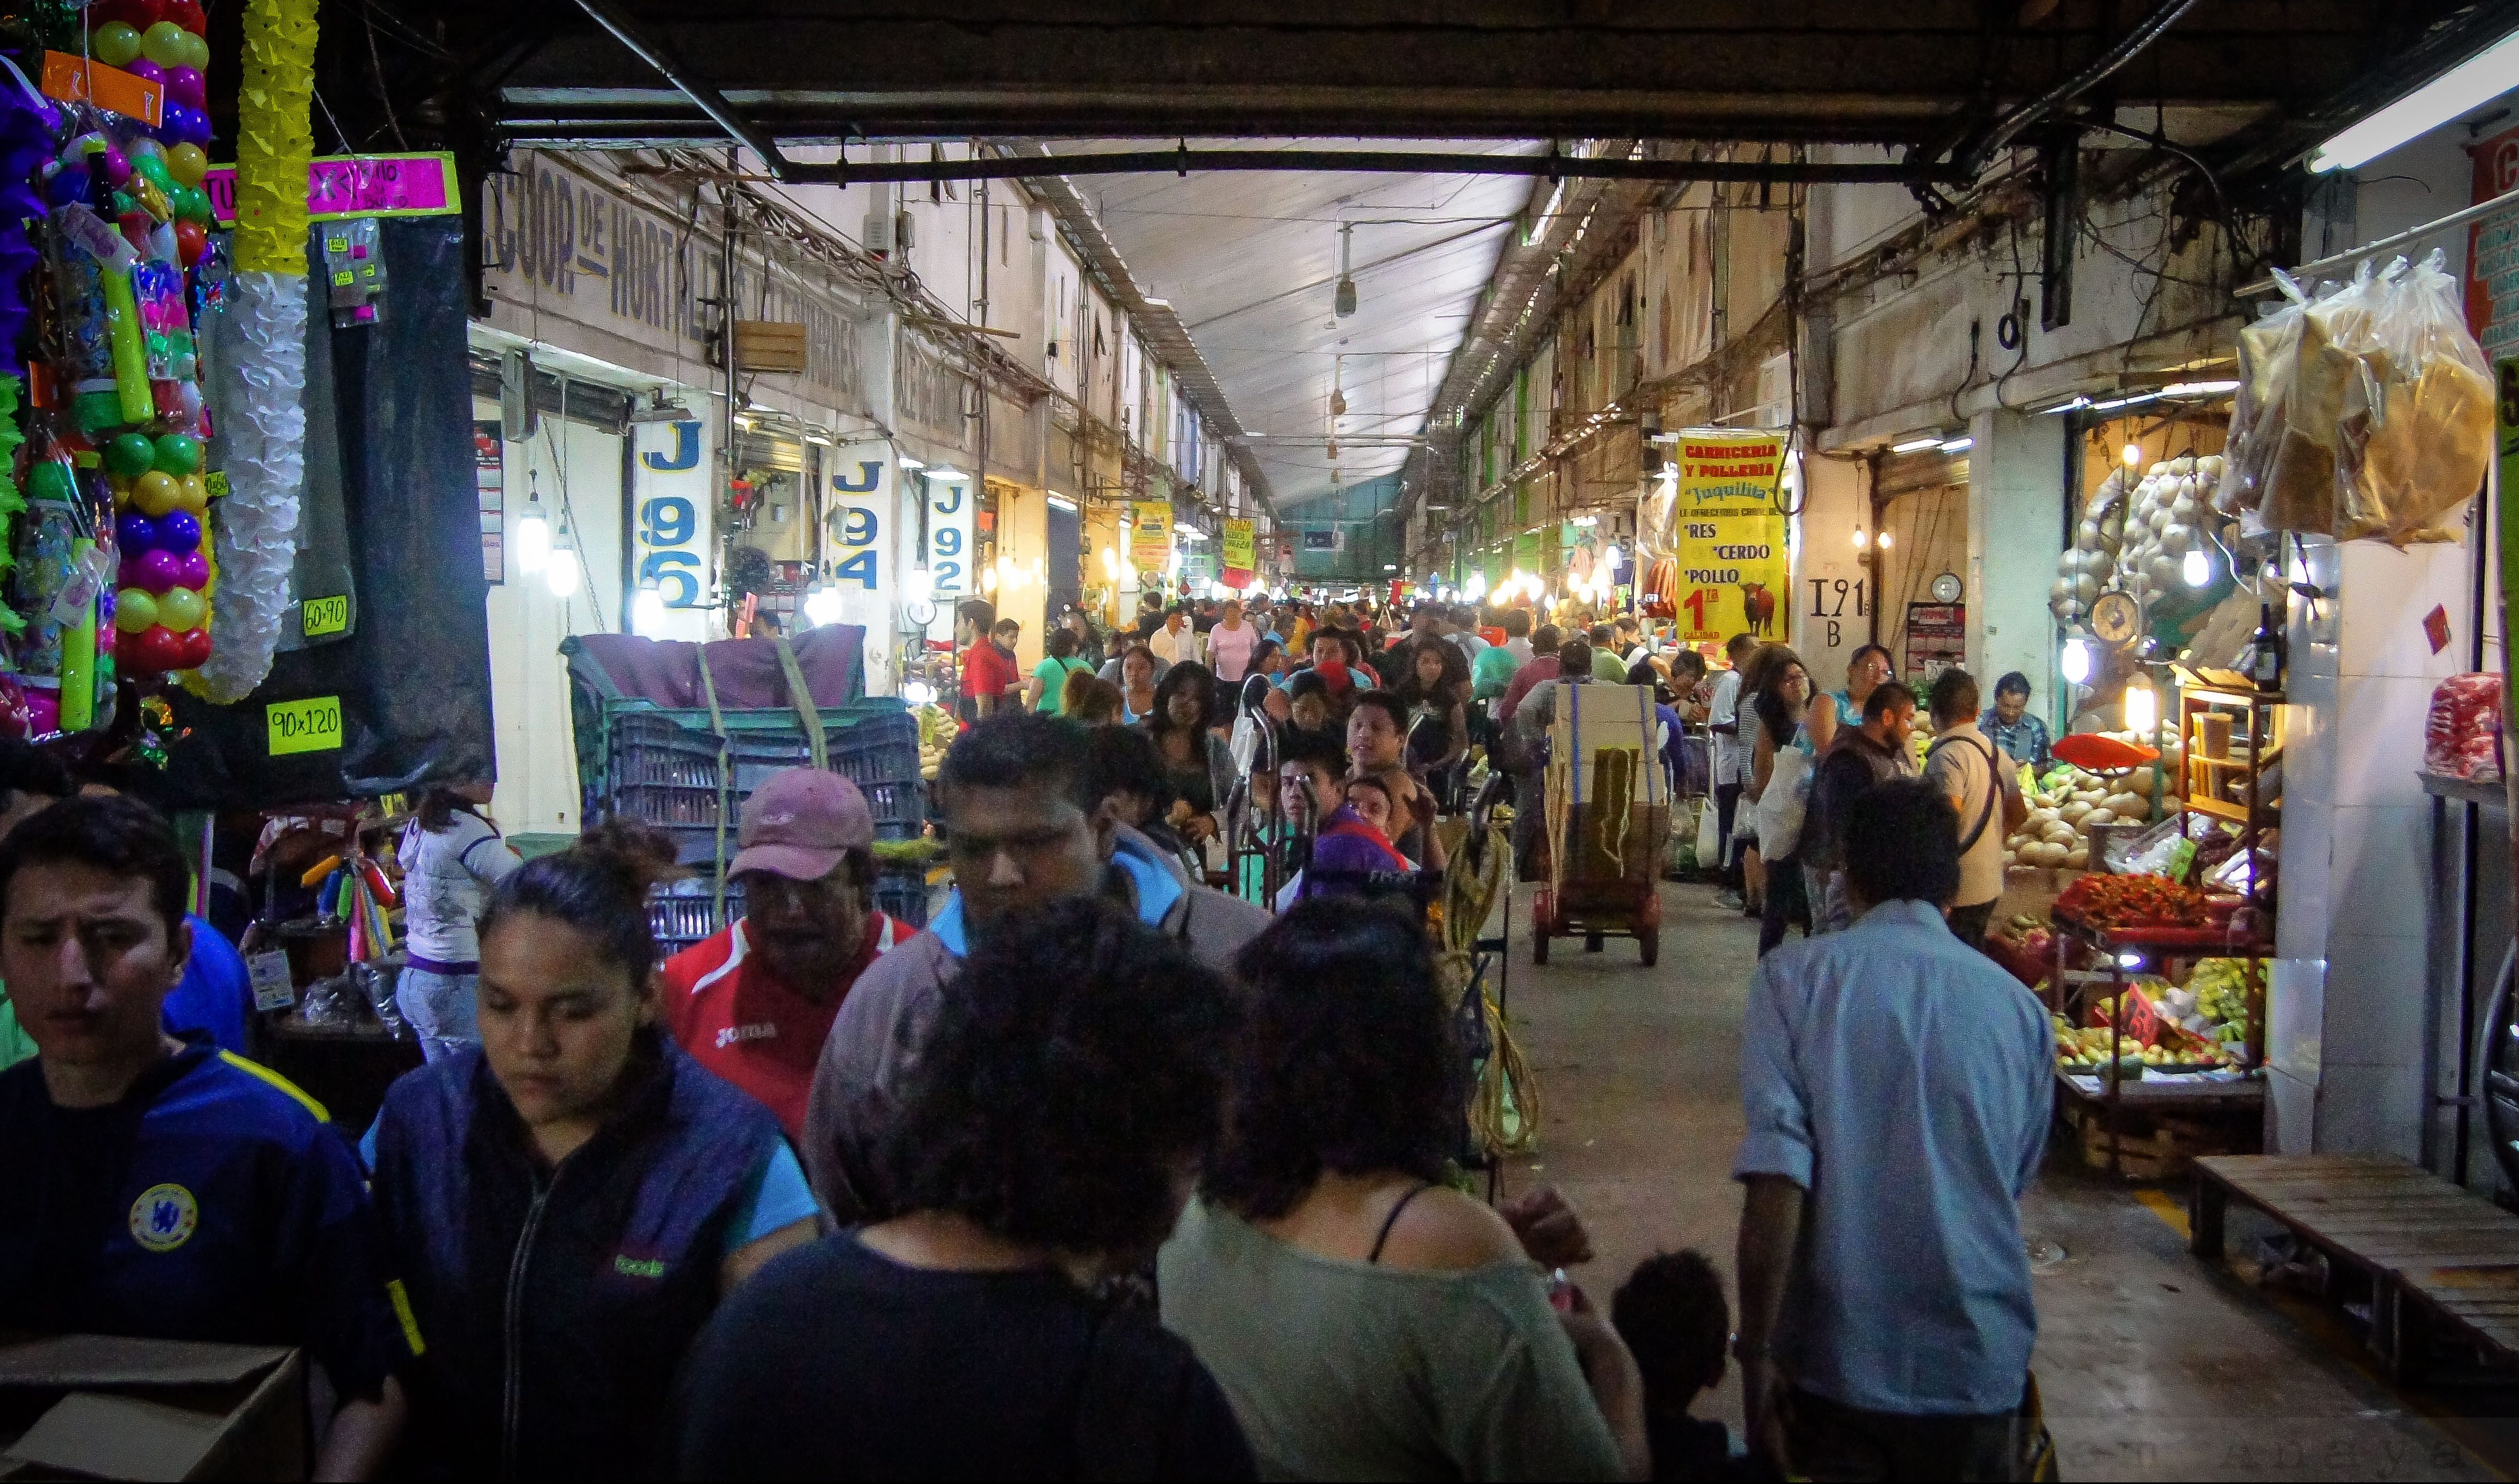 Inside a hall packed with people at Central de Abasto, the world's largest wholesale market where Mexico's cultural heritage is also on display. (image © Sam Anaya A.)